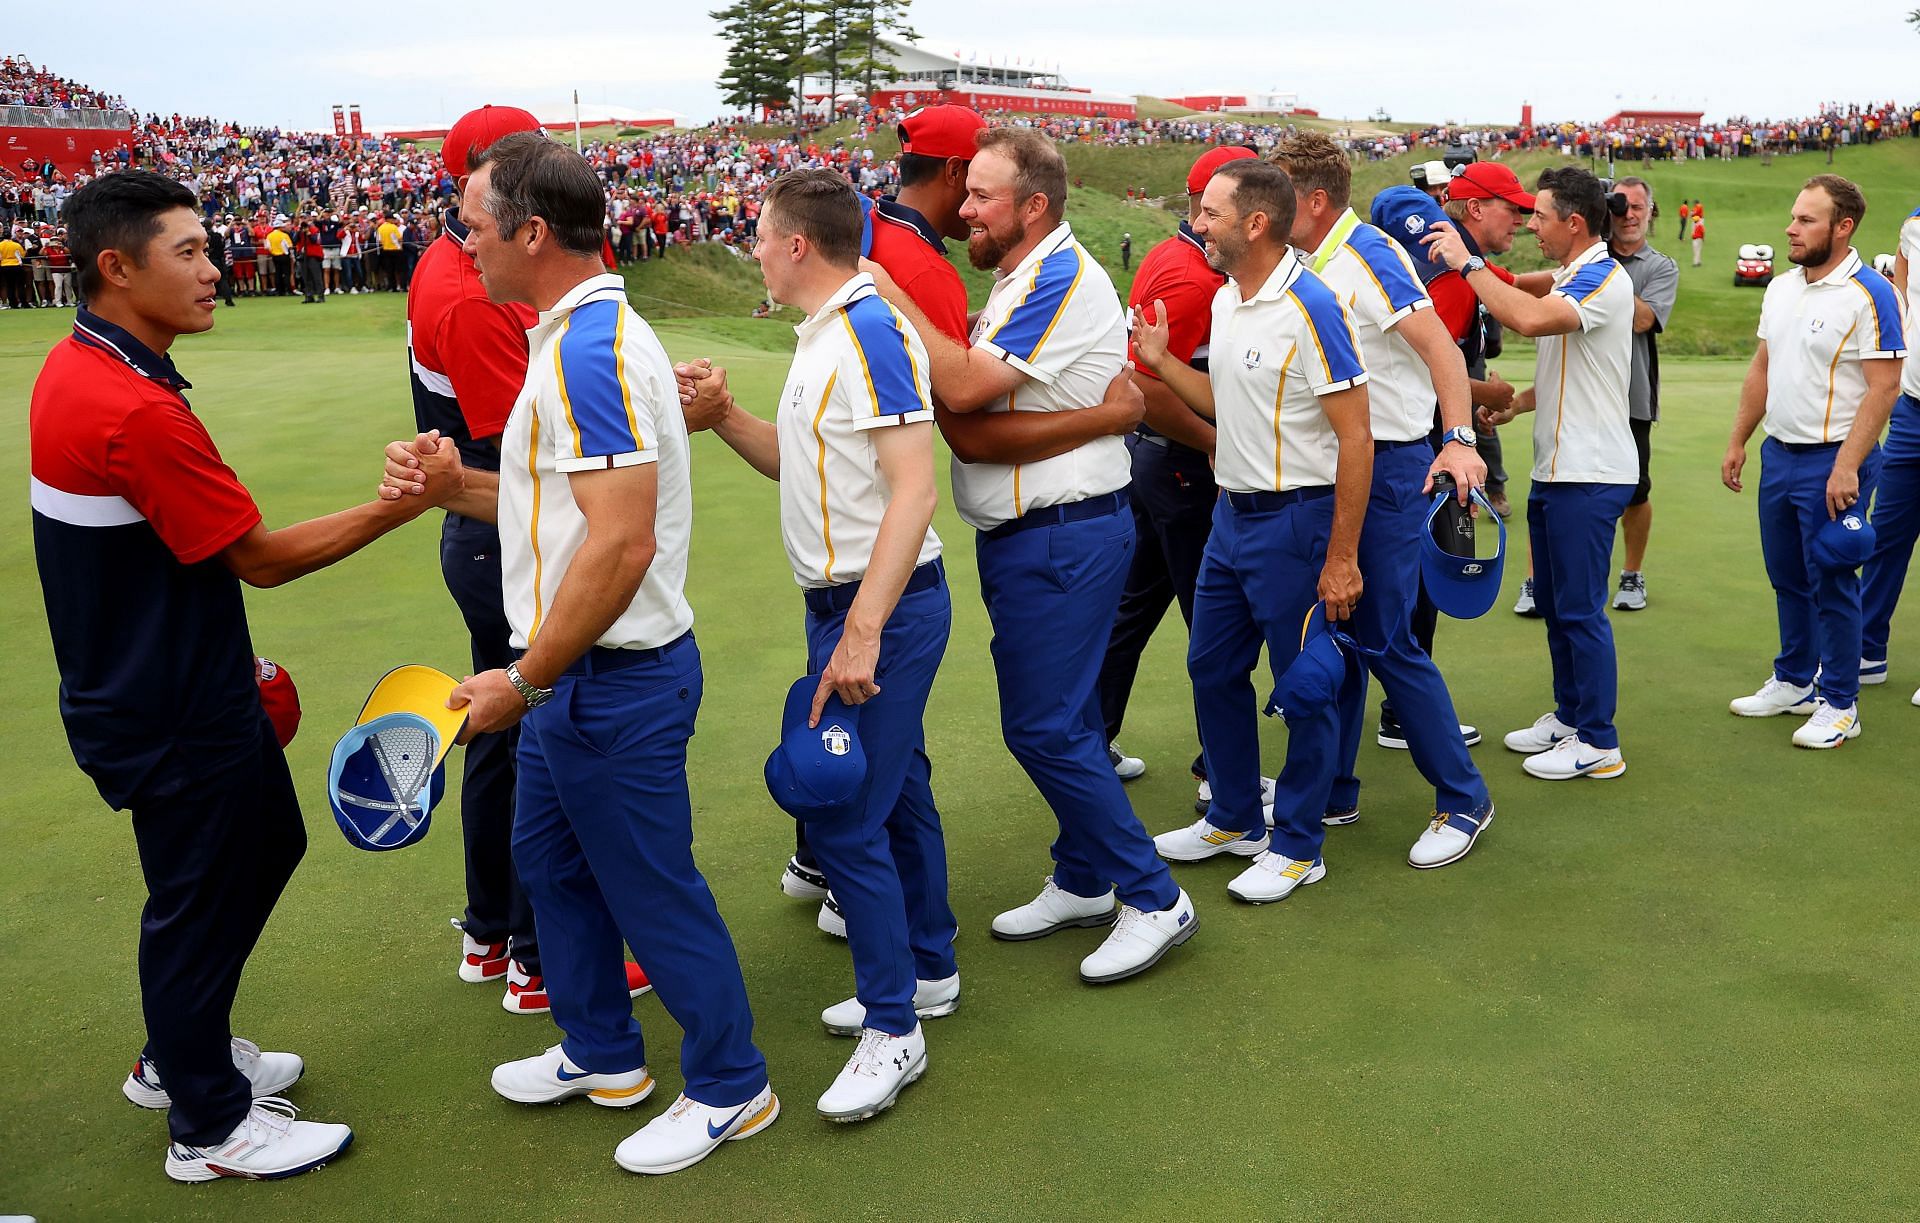 43rd Ryder Cup 2021 (Image via Getty)